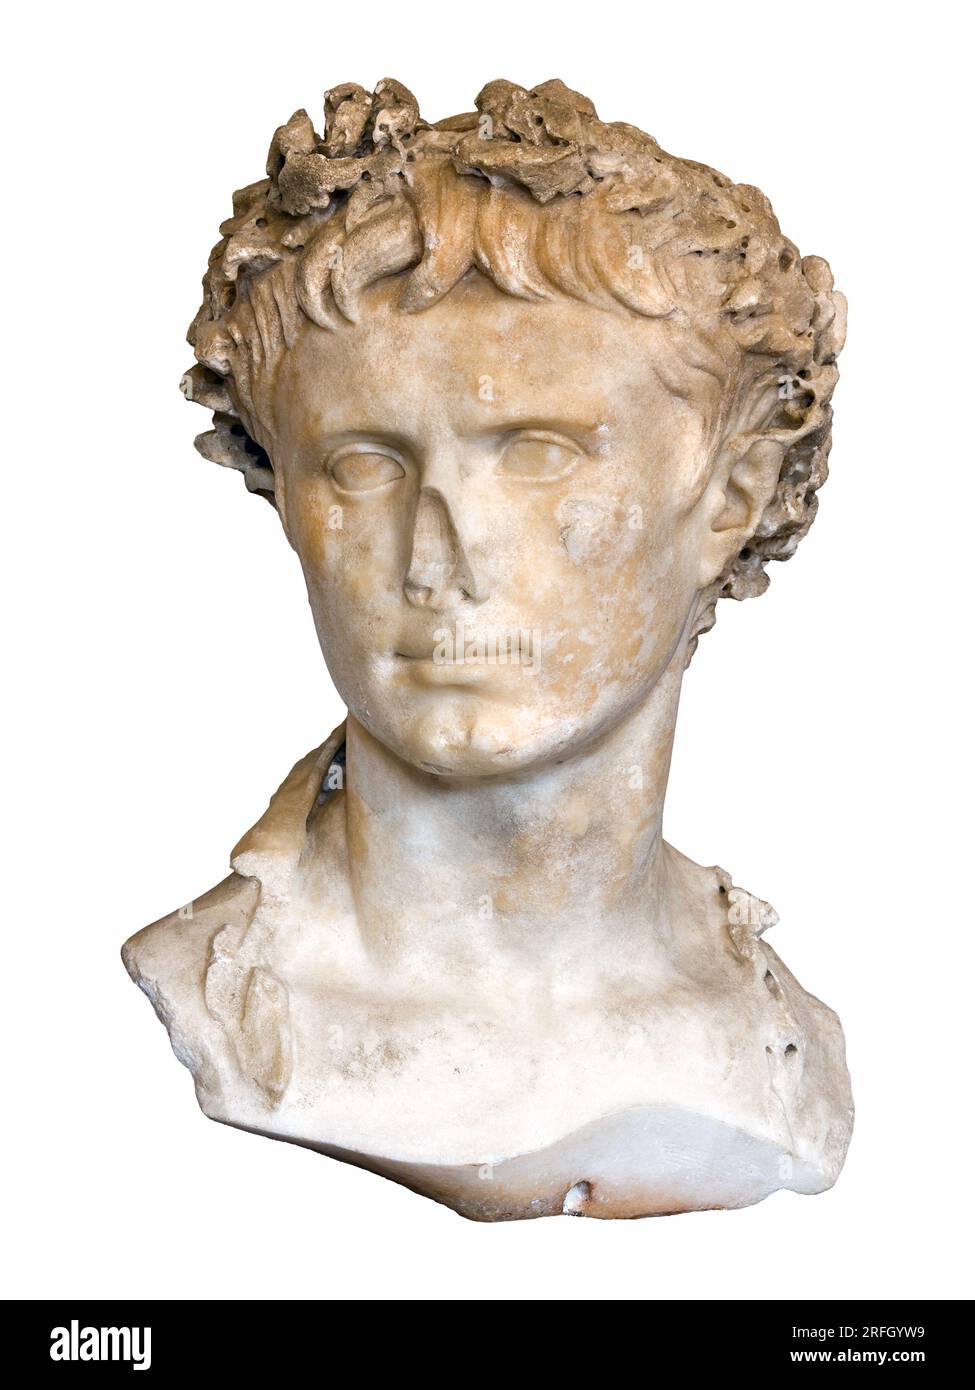 Bust of Augustus Caesar from Prima Porta, marble statue of the first emperor of the Roman Empire, isolated close up Stock Photo